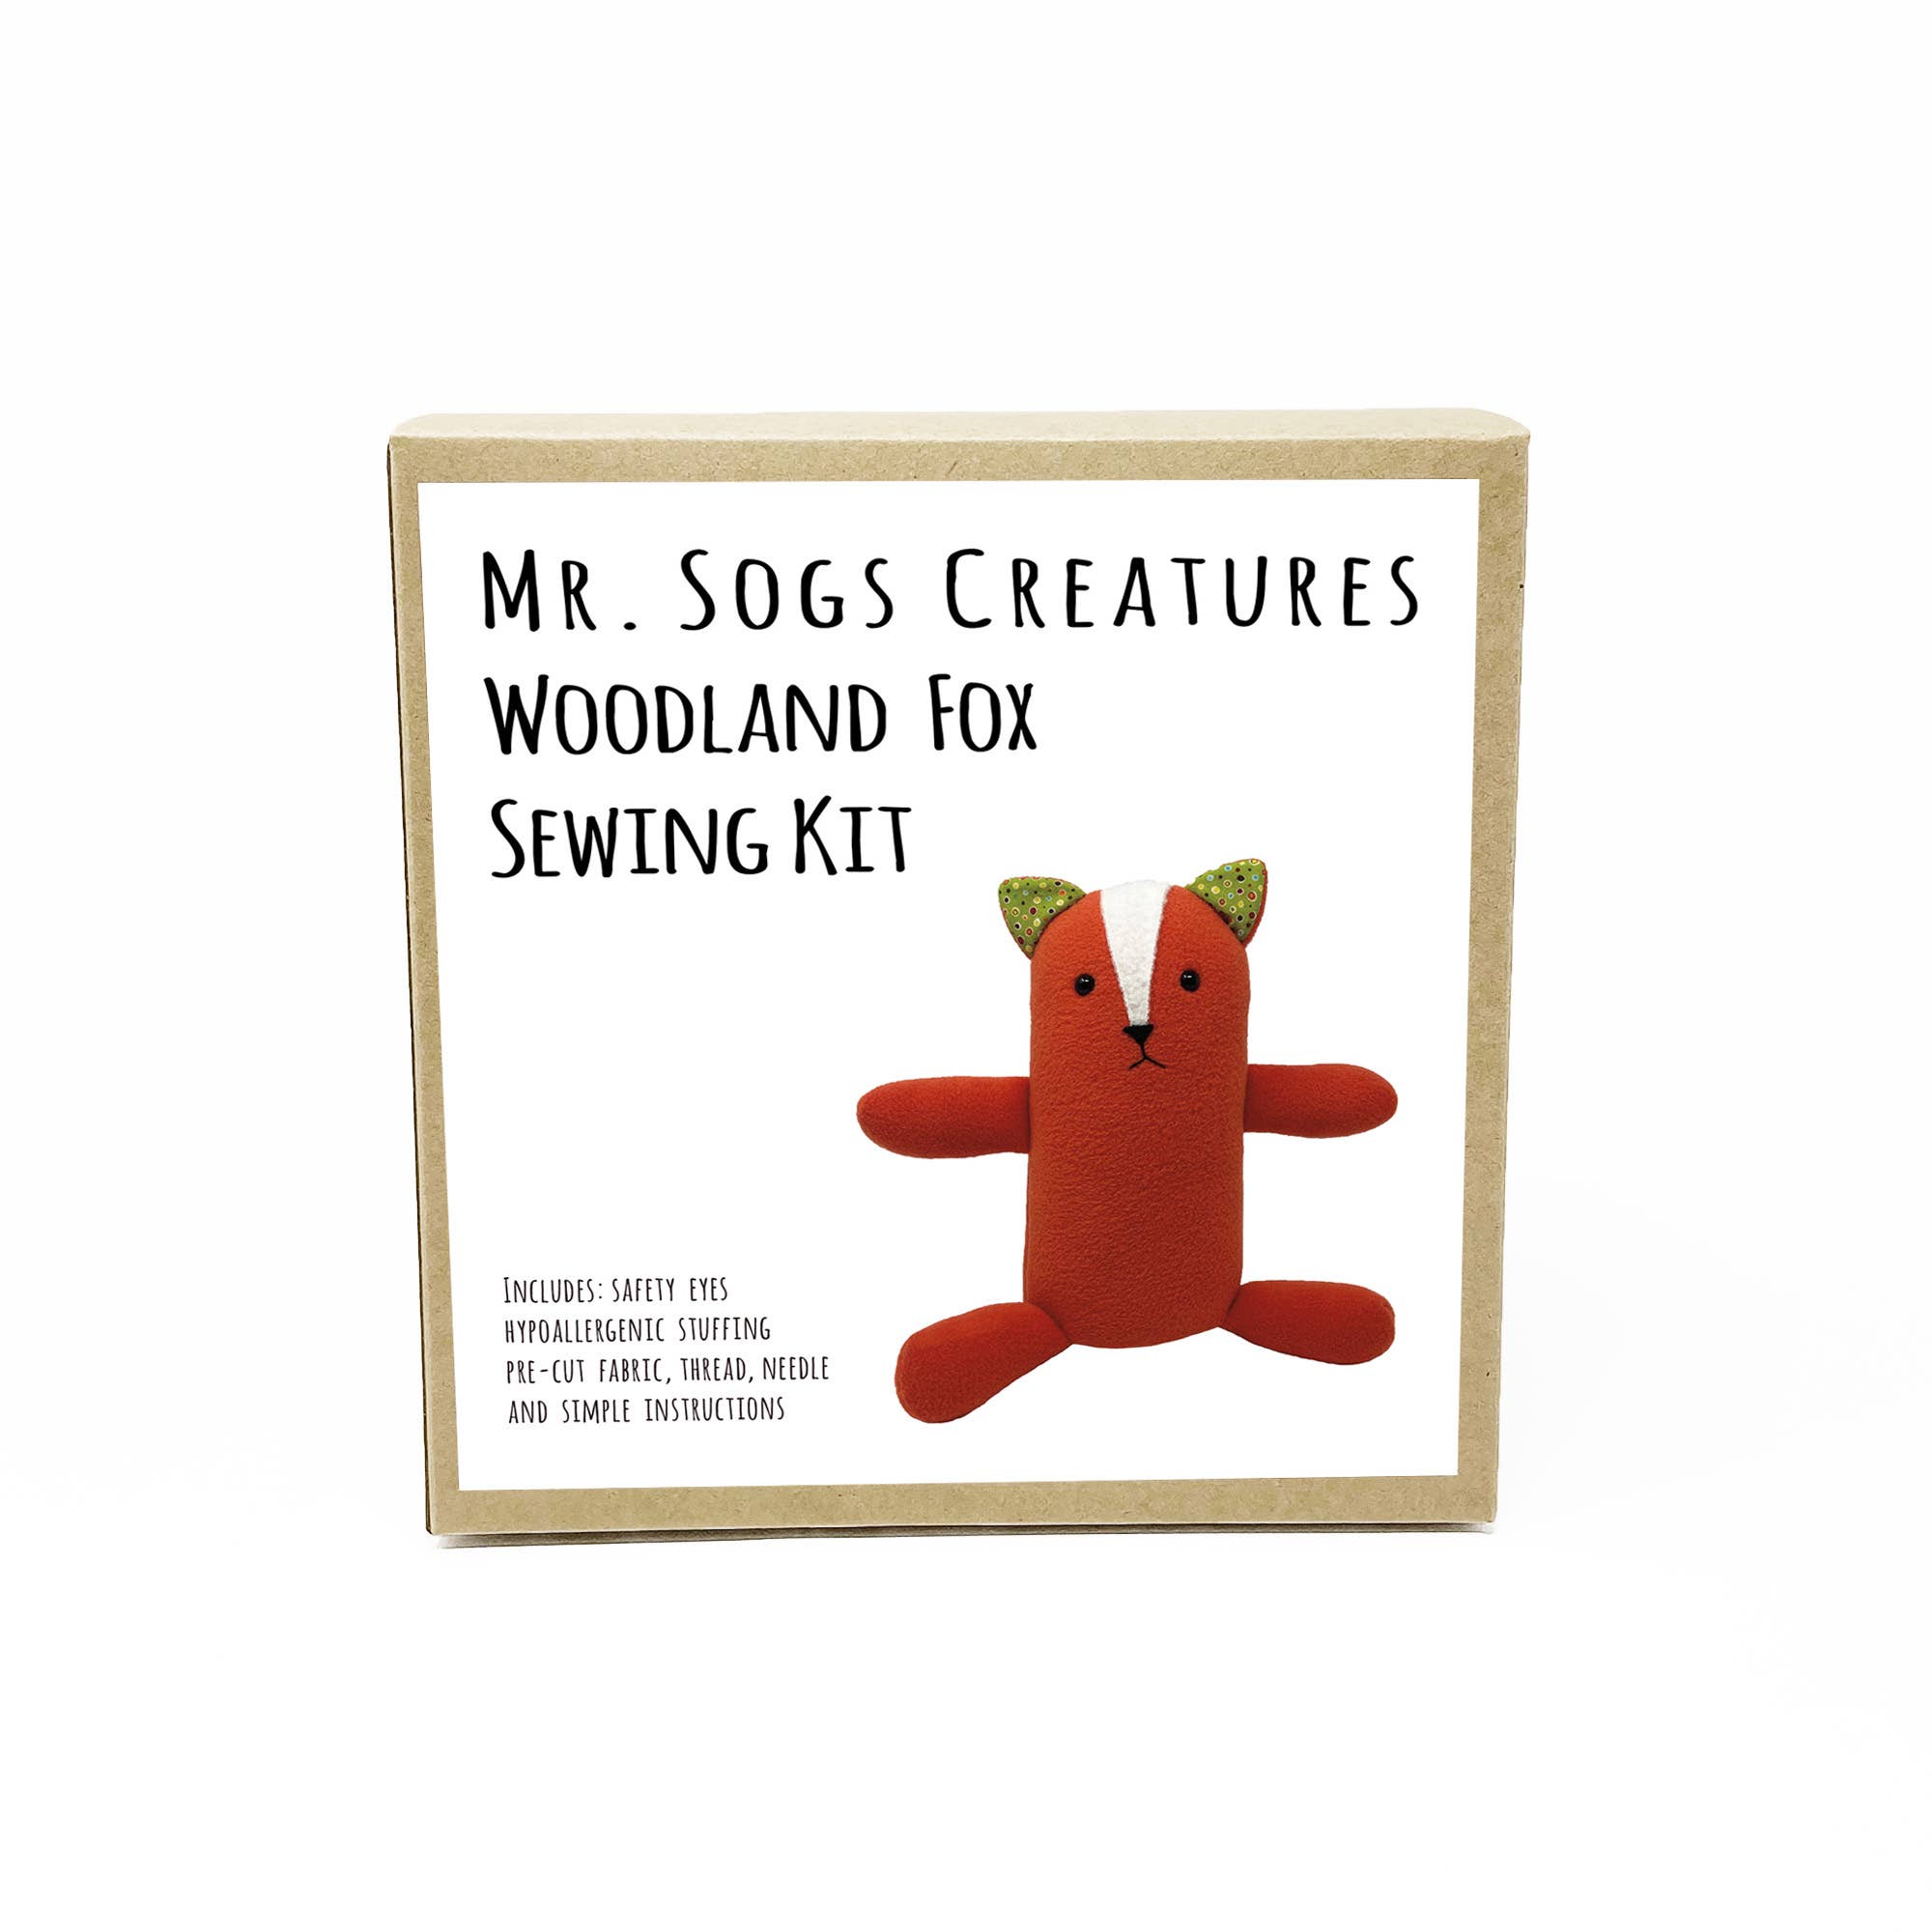 Mr. Sogs Creatures Sewing Kit | Woodland Fox